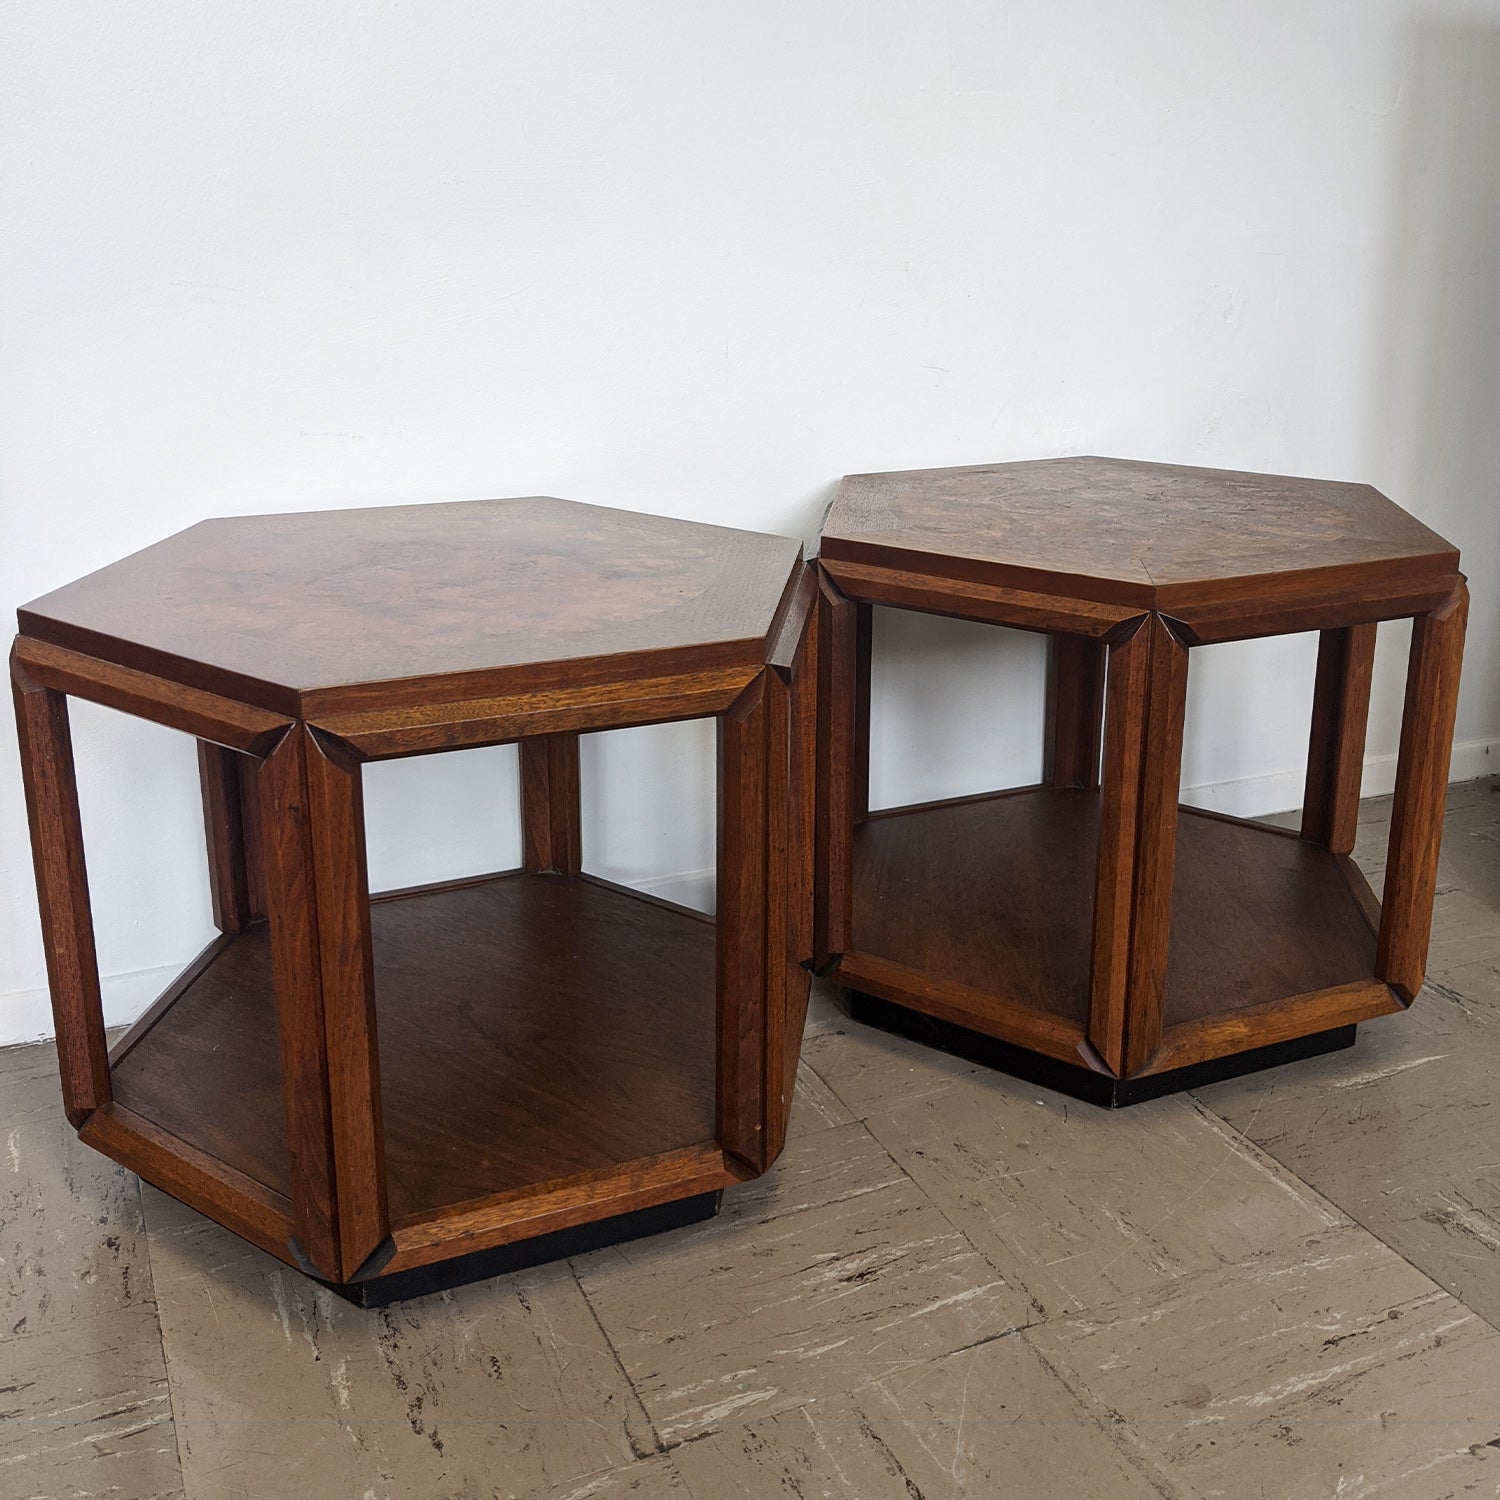 Two brown burl tables with open bottom, side-by-side 